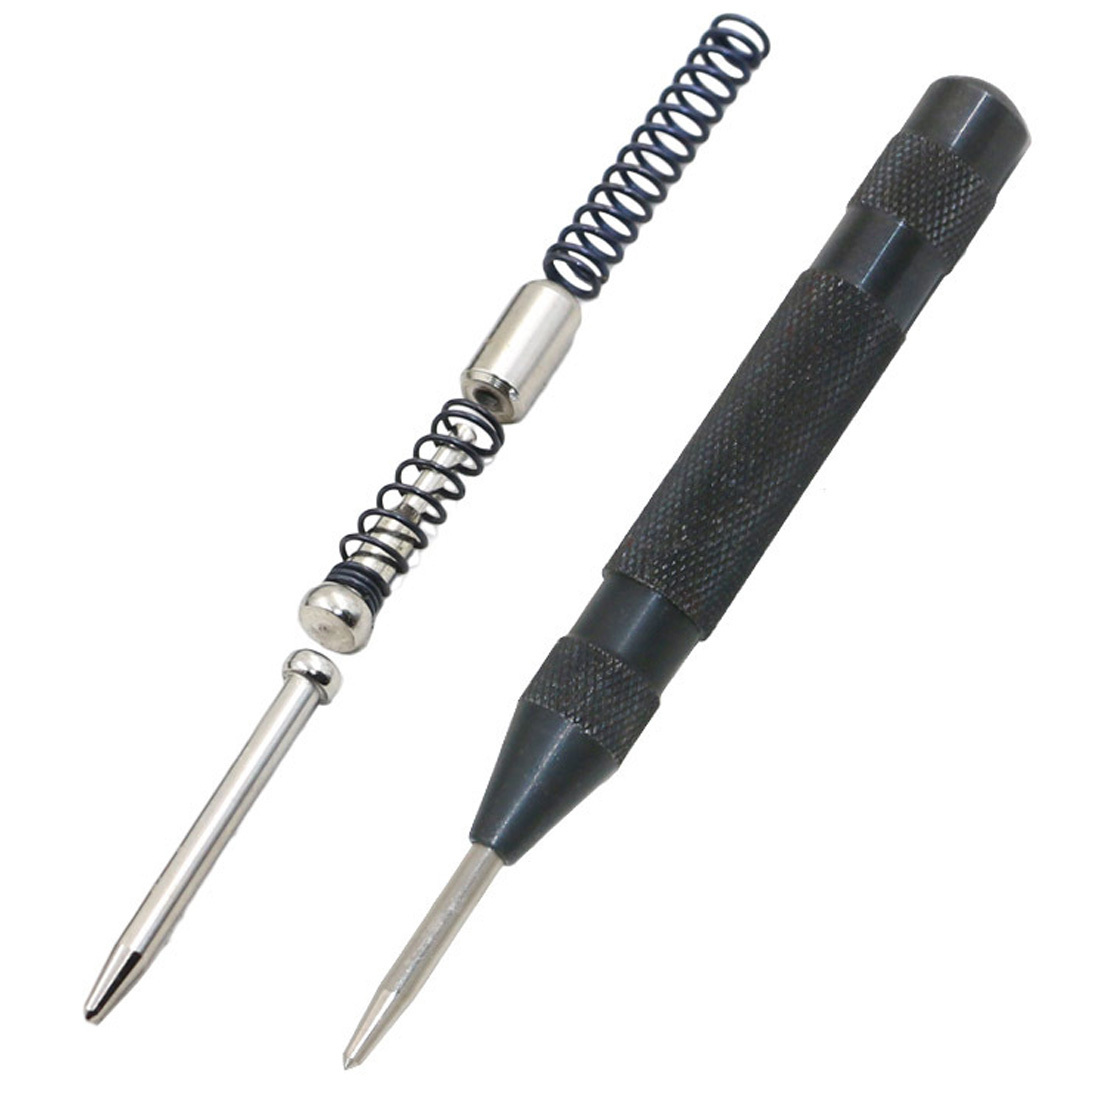  automatic center punch punch impact drilling trace attaching marking high speed times steel made 